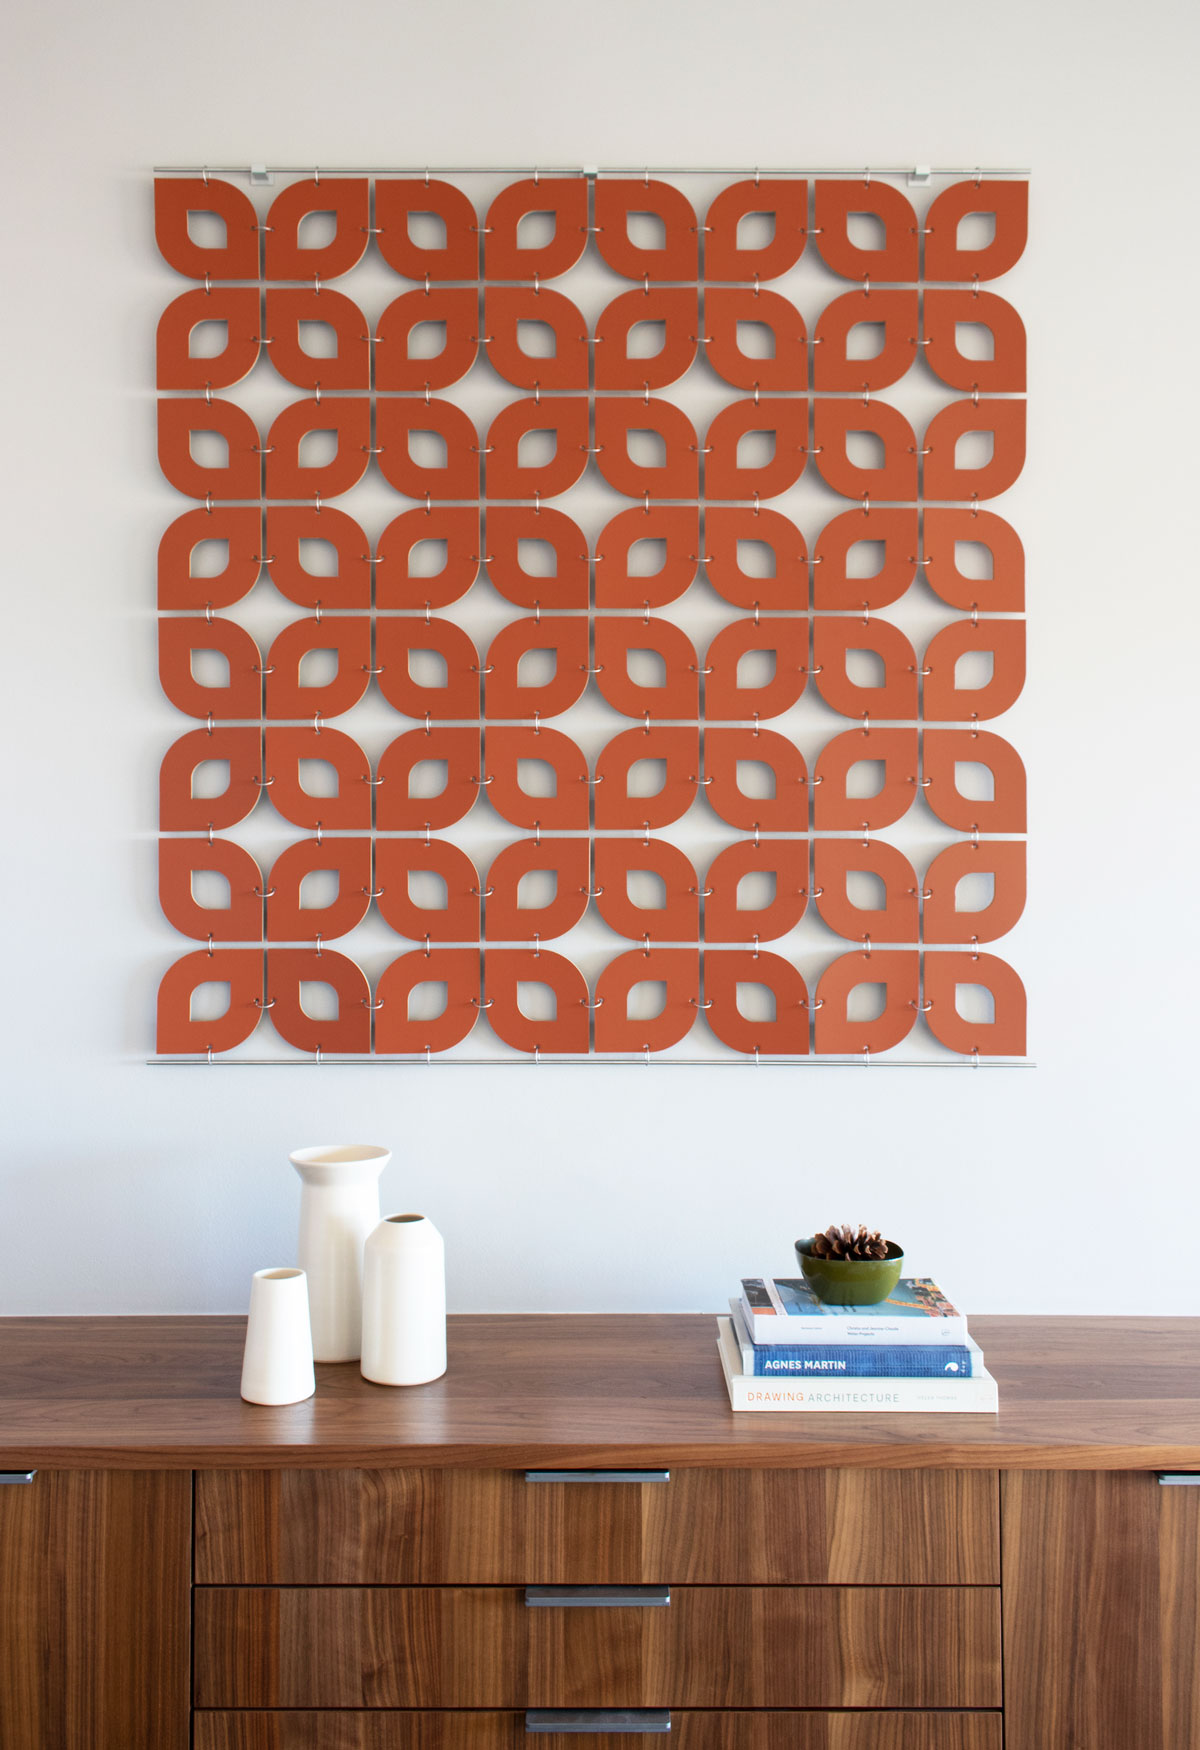 Deep orange leather wall hanging with curved forms connected by metal rings